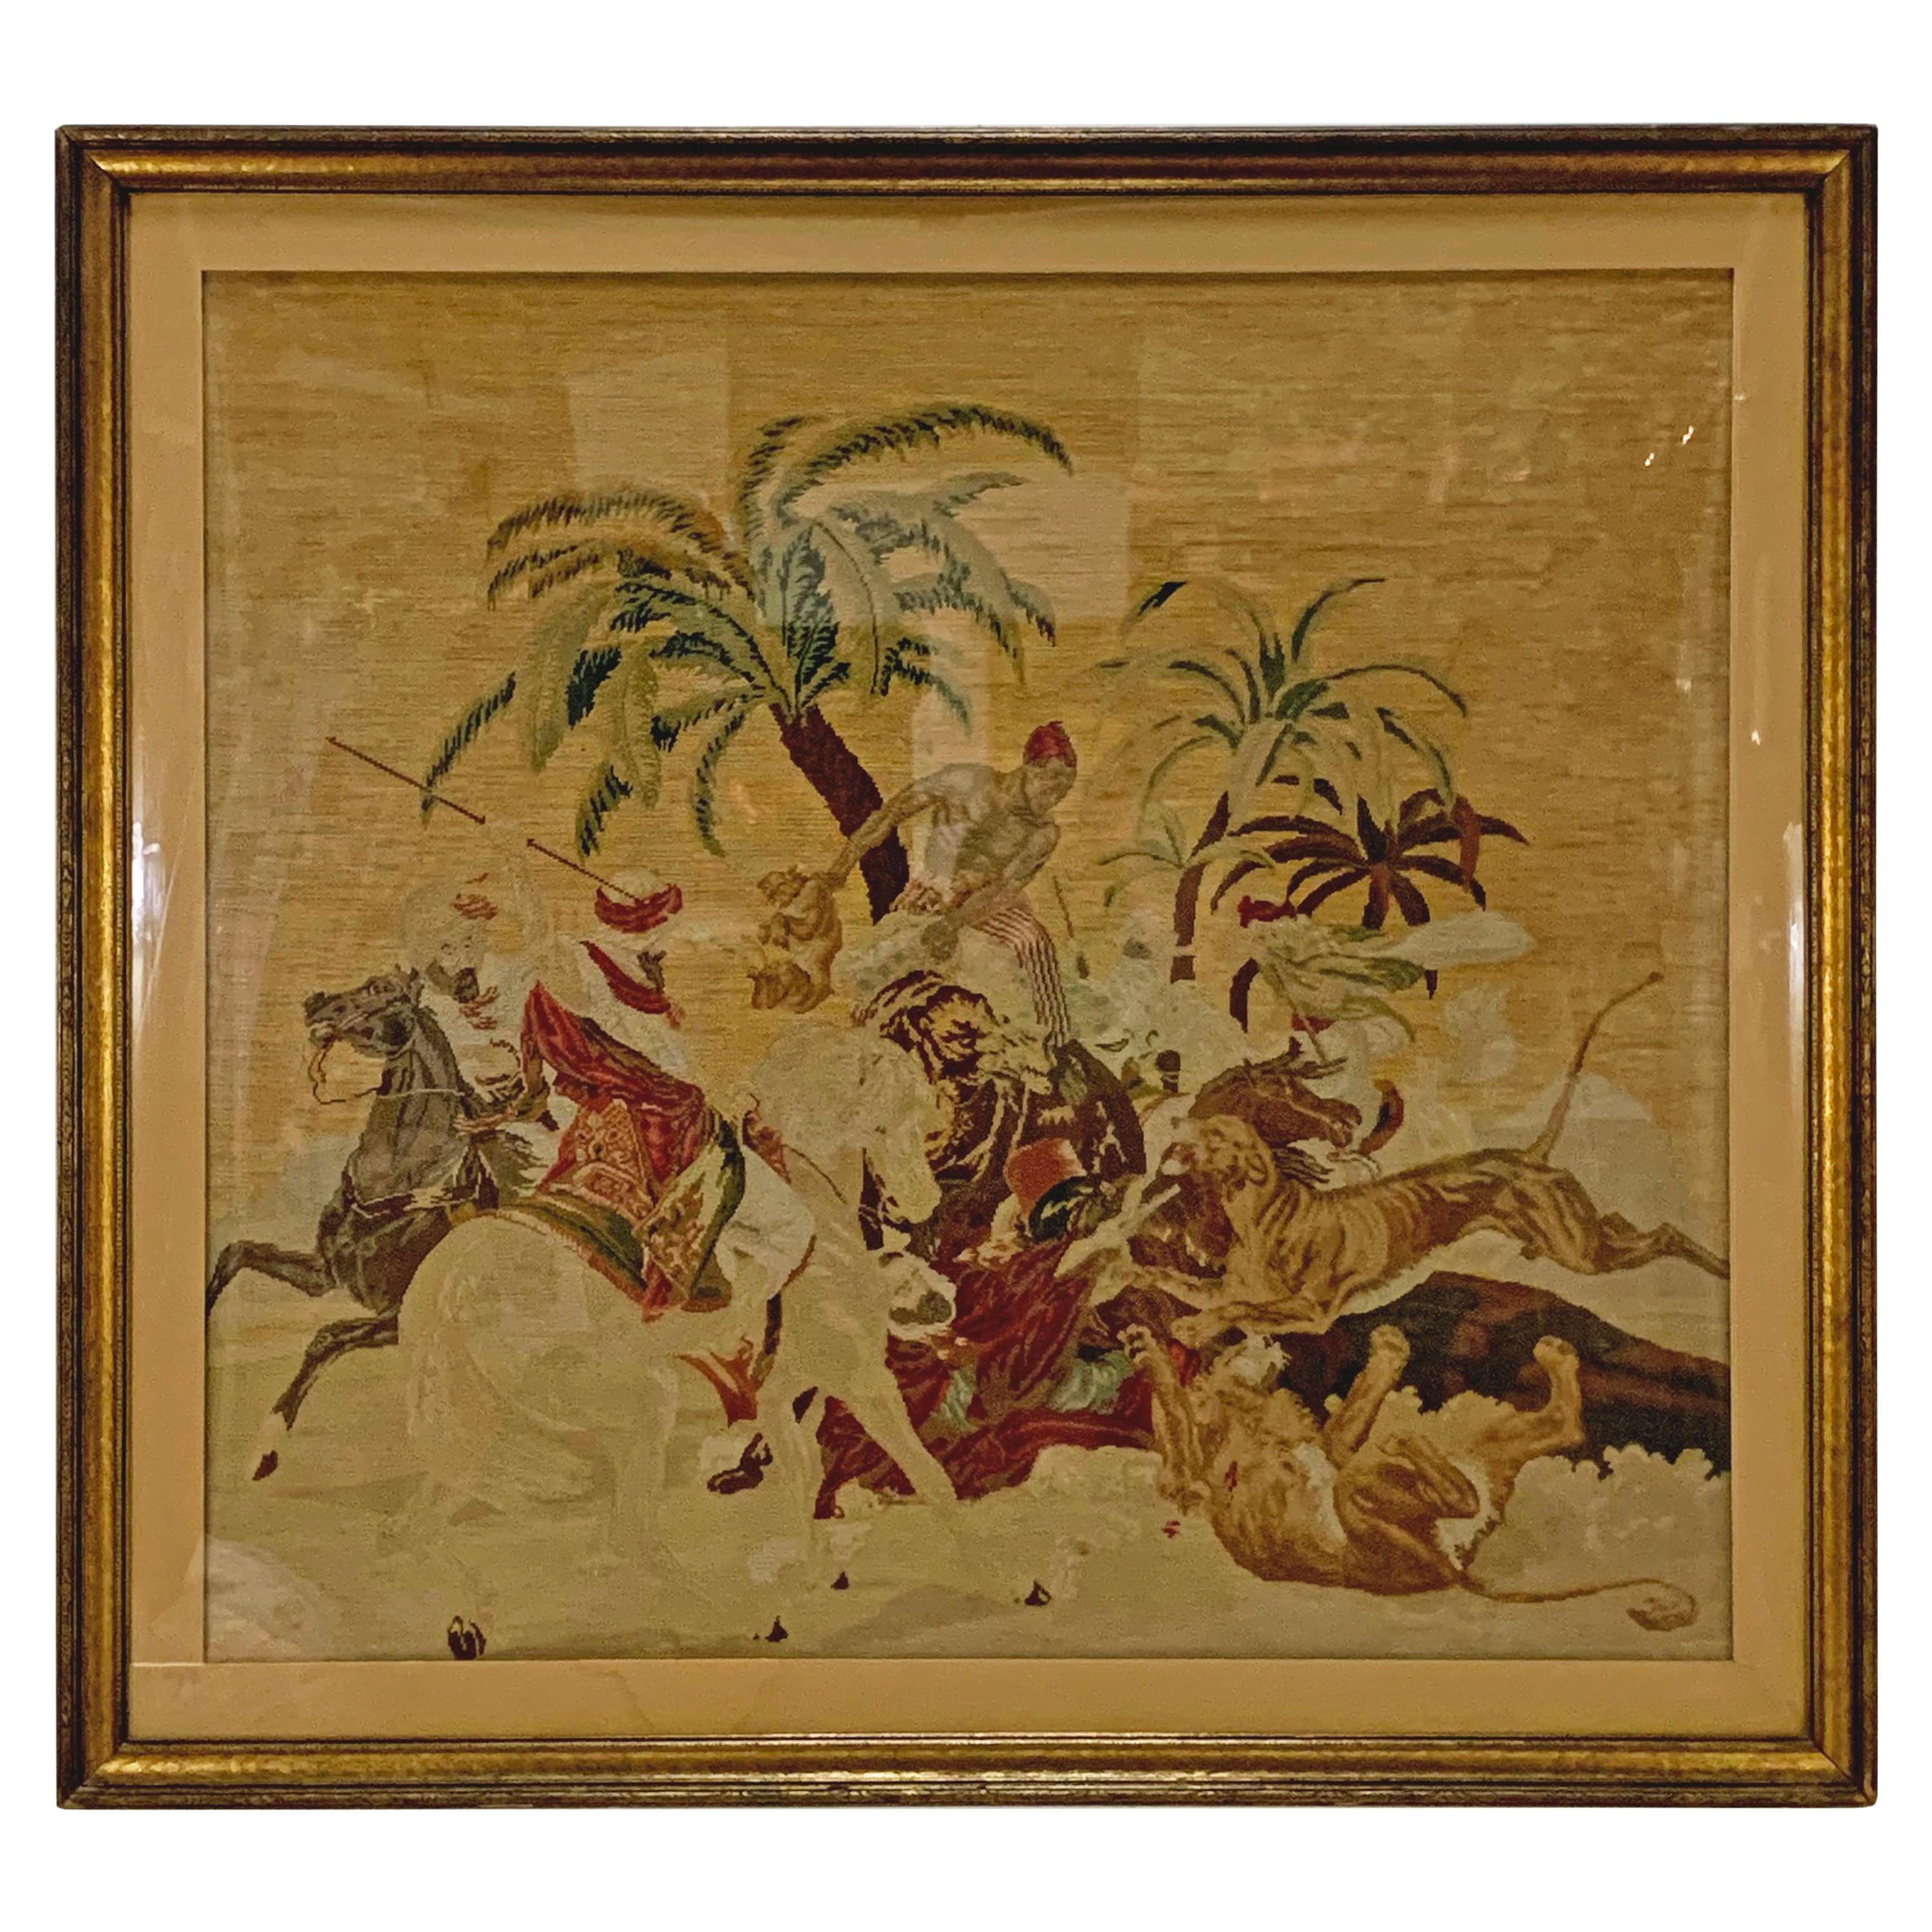 Antique 19th Century Gobelin Style Tapestry After Horace Vernet's "Lion Hunt"